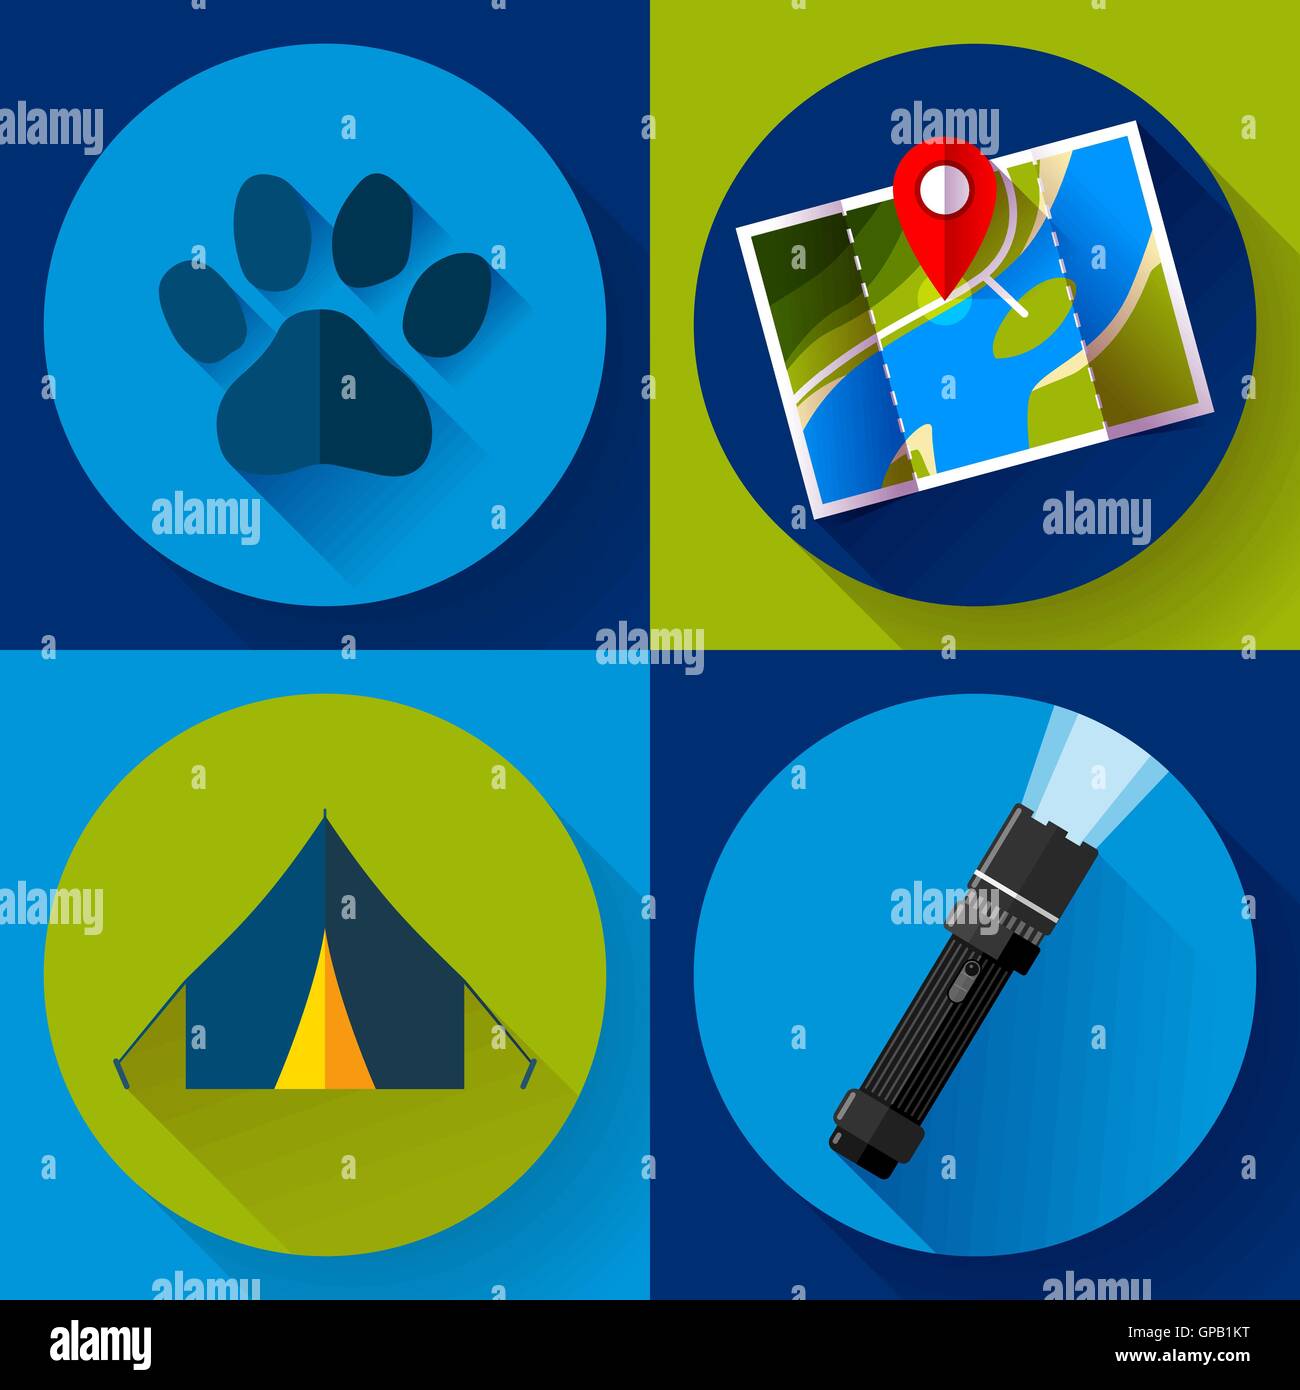 Camping Hiking icons set, flat design style vector Stock Vector